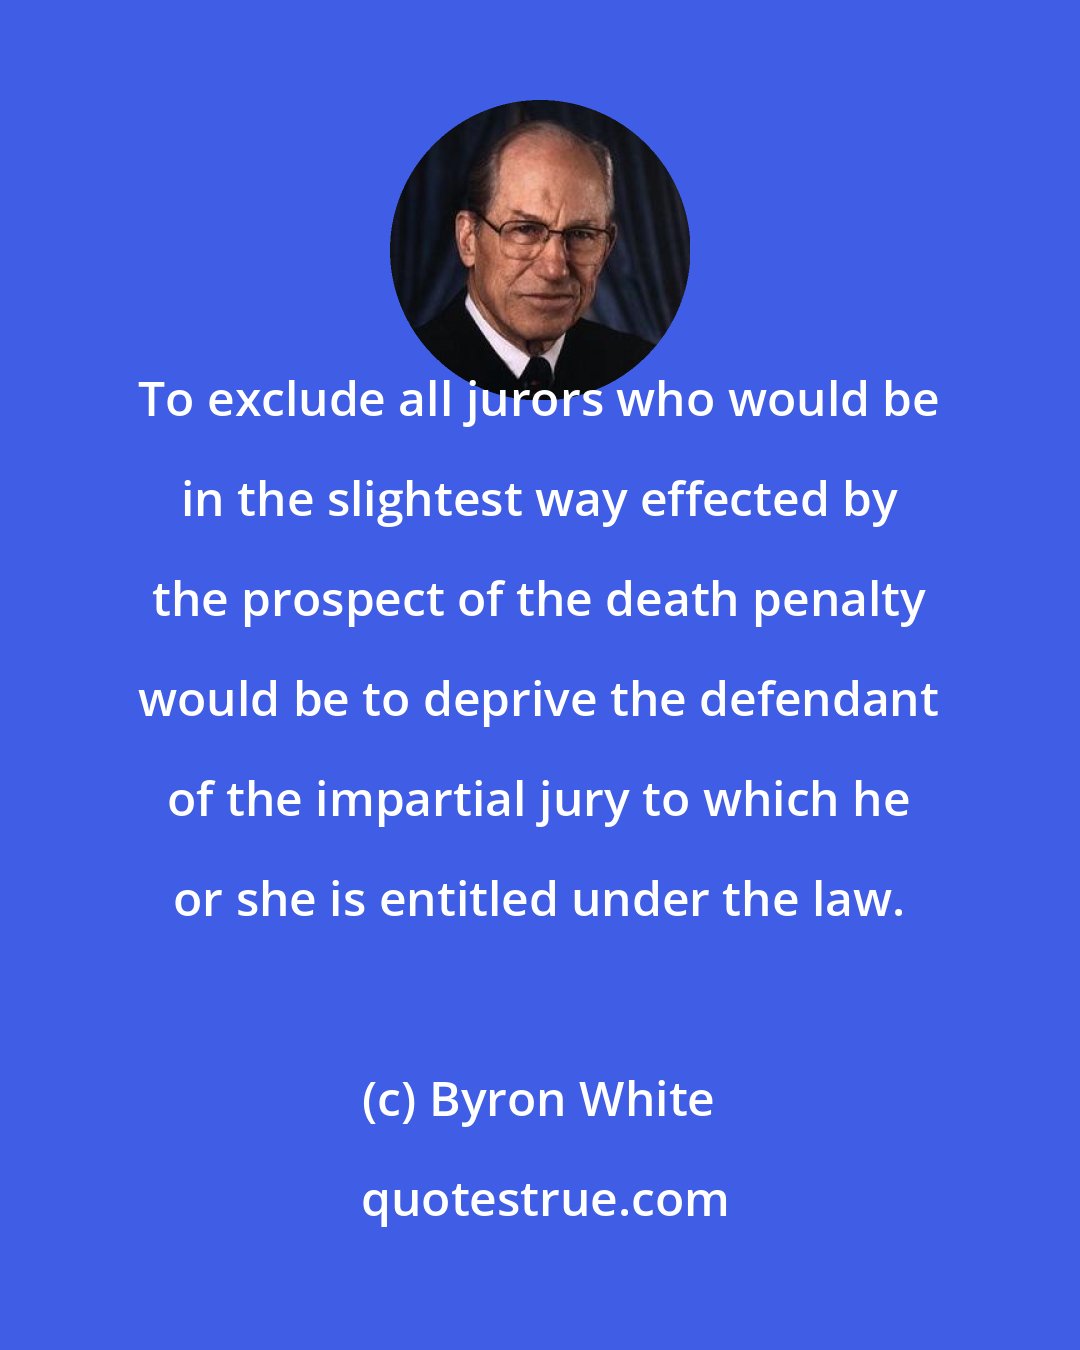 Byron White: To exclude all jurors who would be in the slightest way effected by the prospect of the death penalty would be to deprive the defendant of the impartial jury to which he or she is entitled under the law.